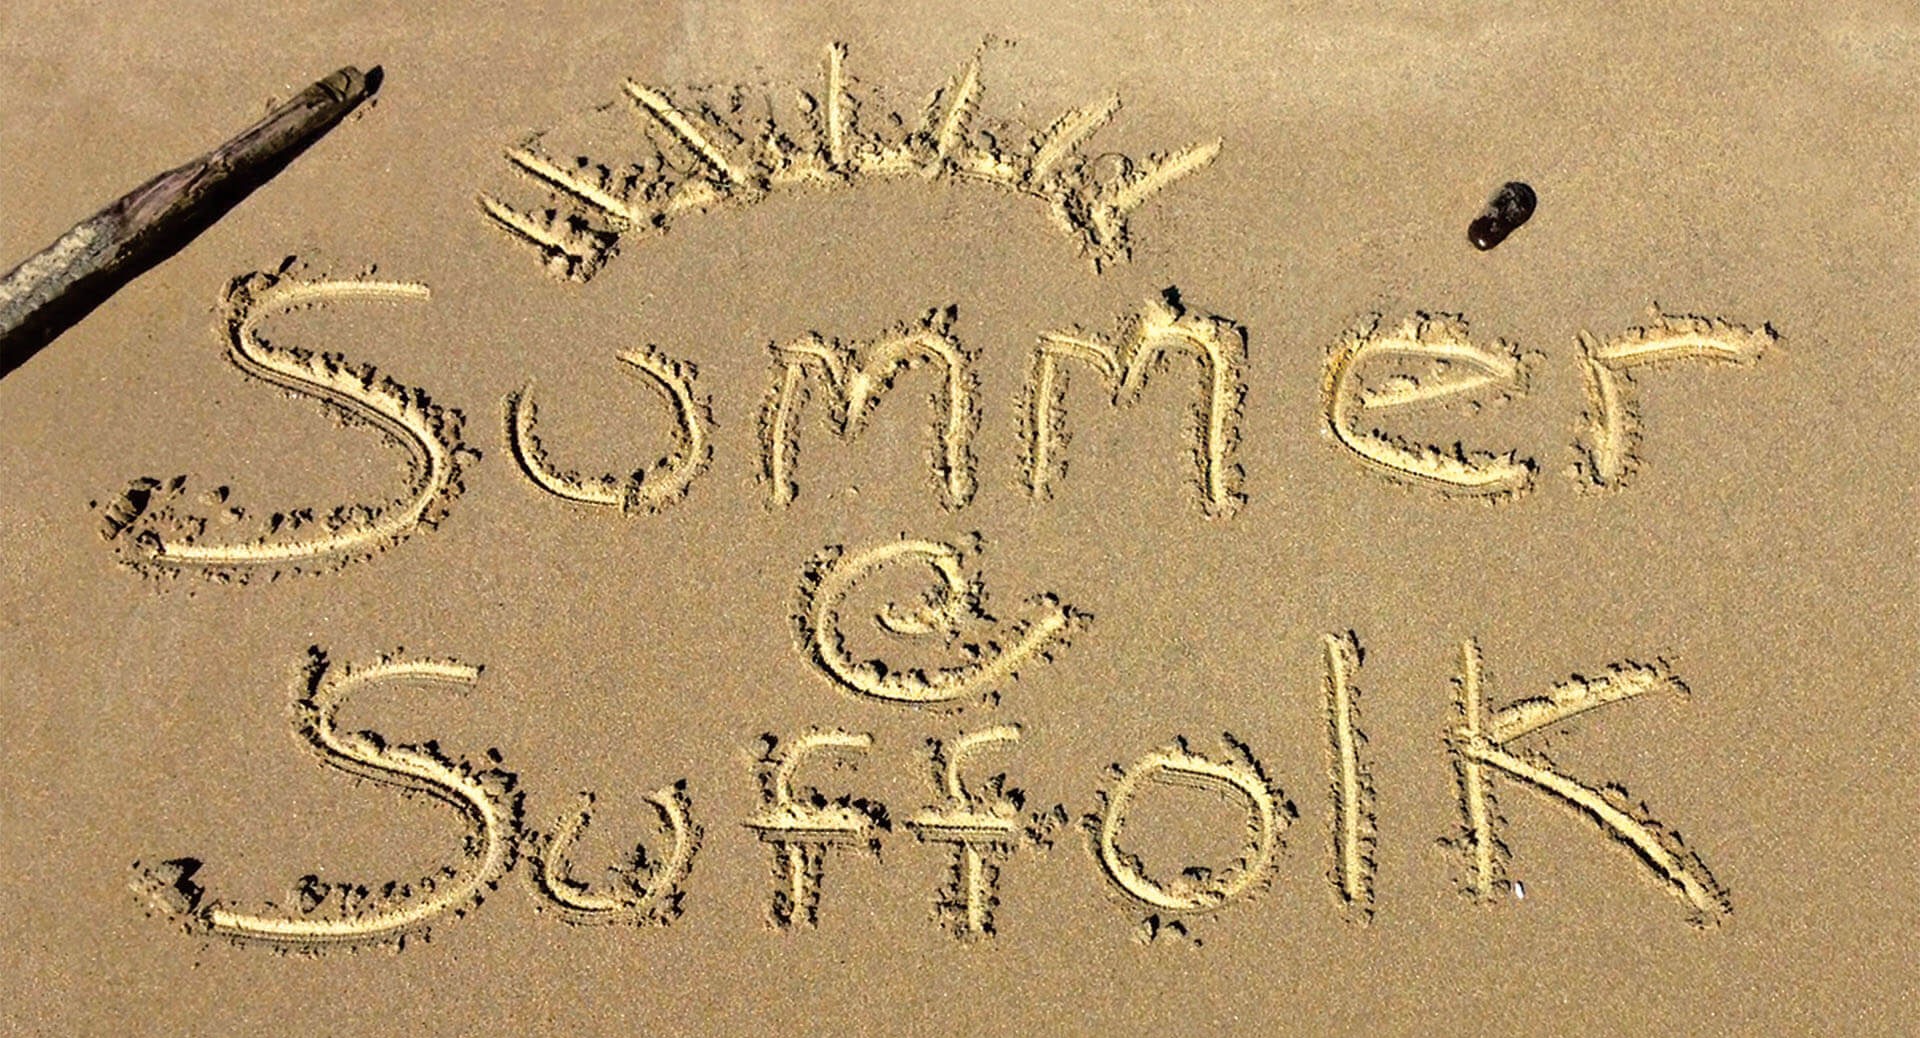 Summer Session at Suffolk written in the sand